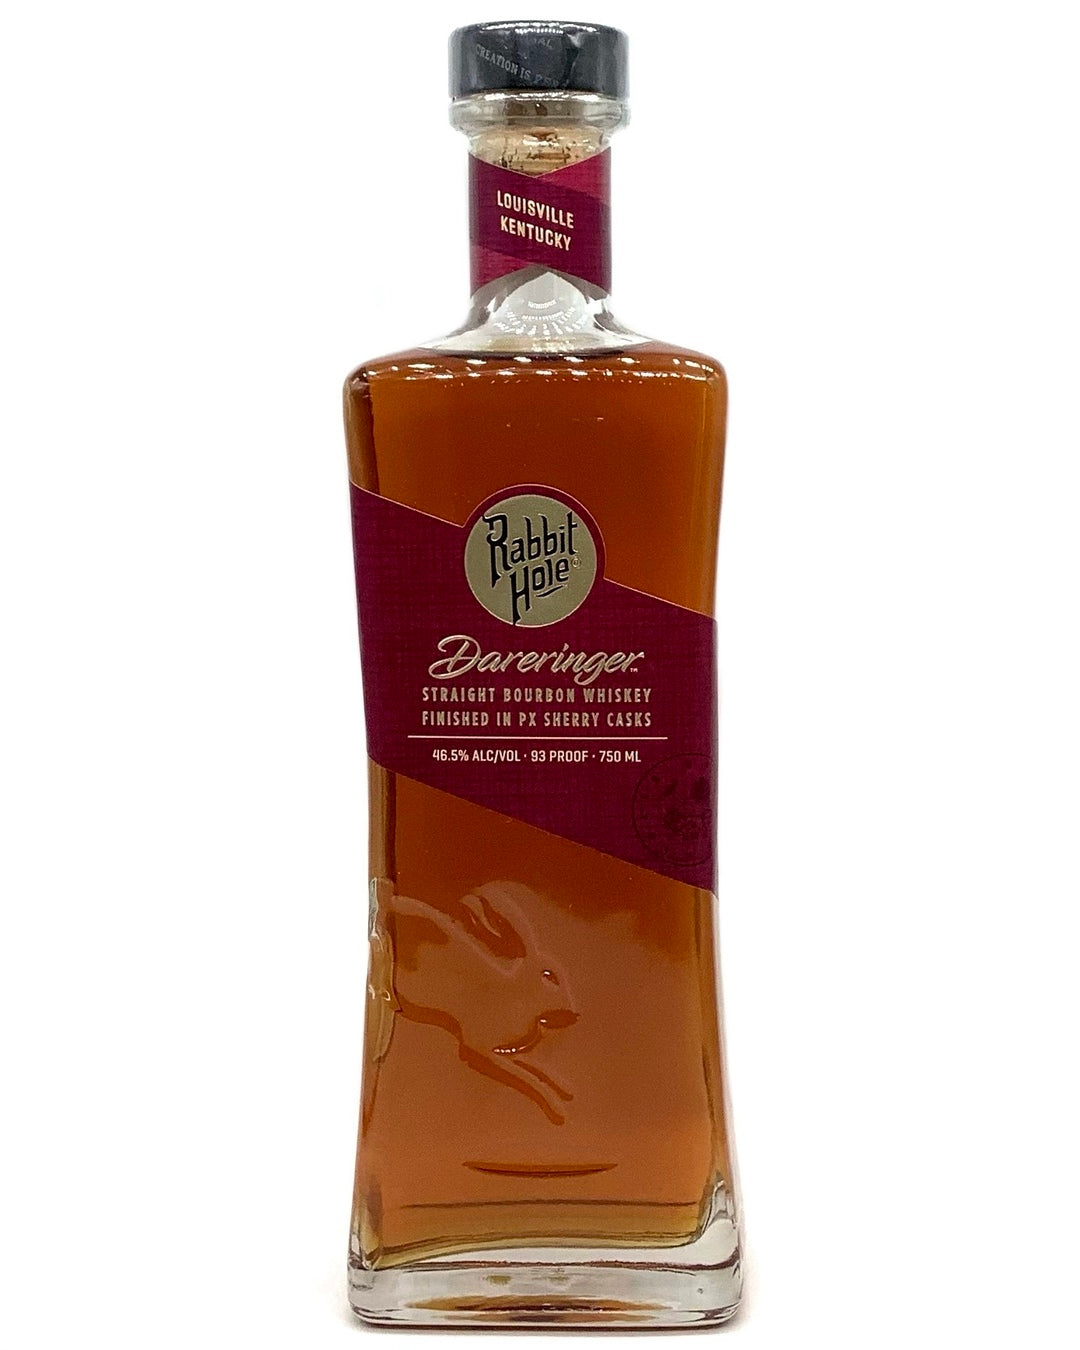 Rabbit Hole "Dareringer" Straight Bourbon Whiskey finished in PX Sherry Cask 750ml